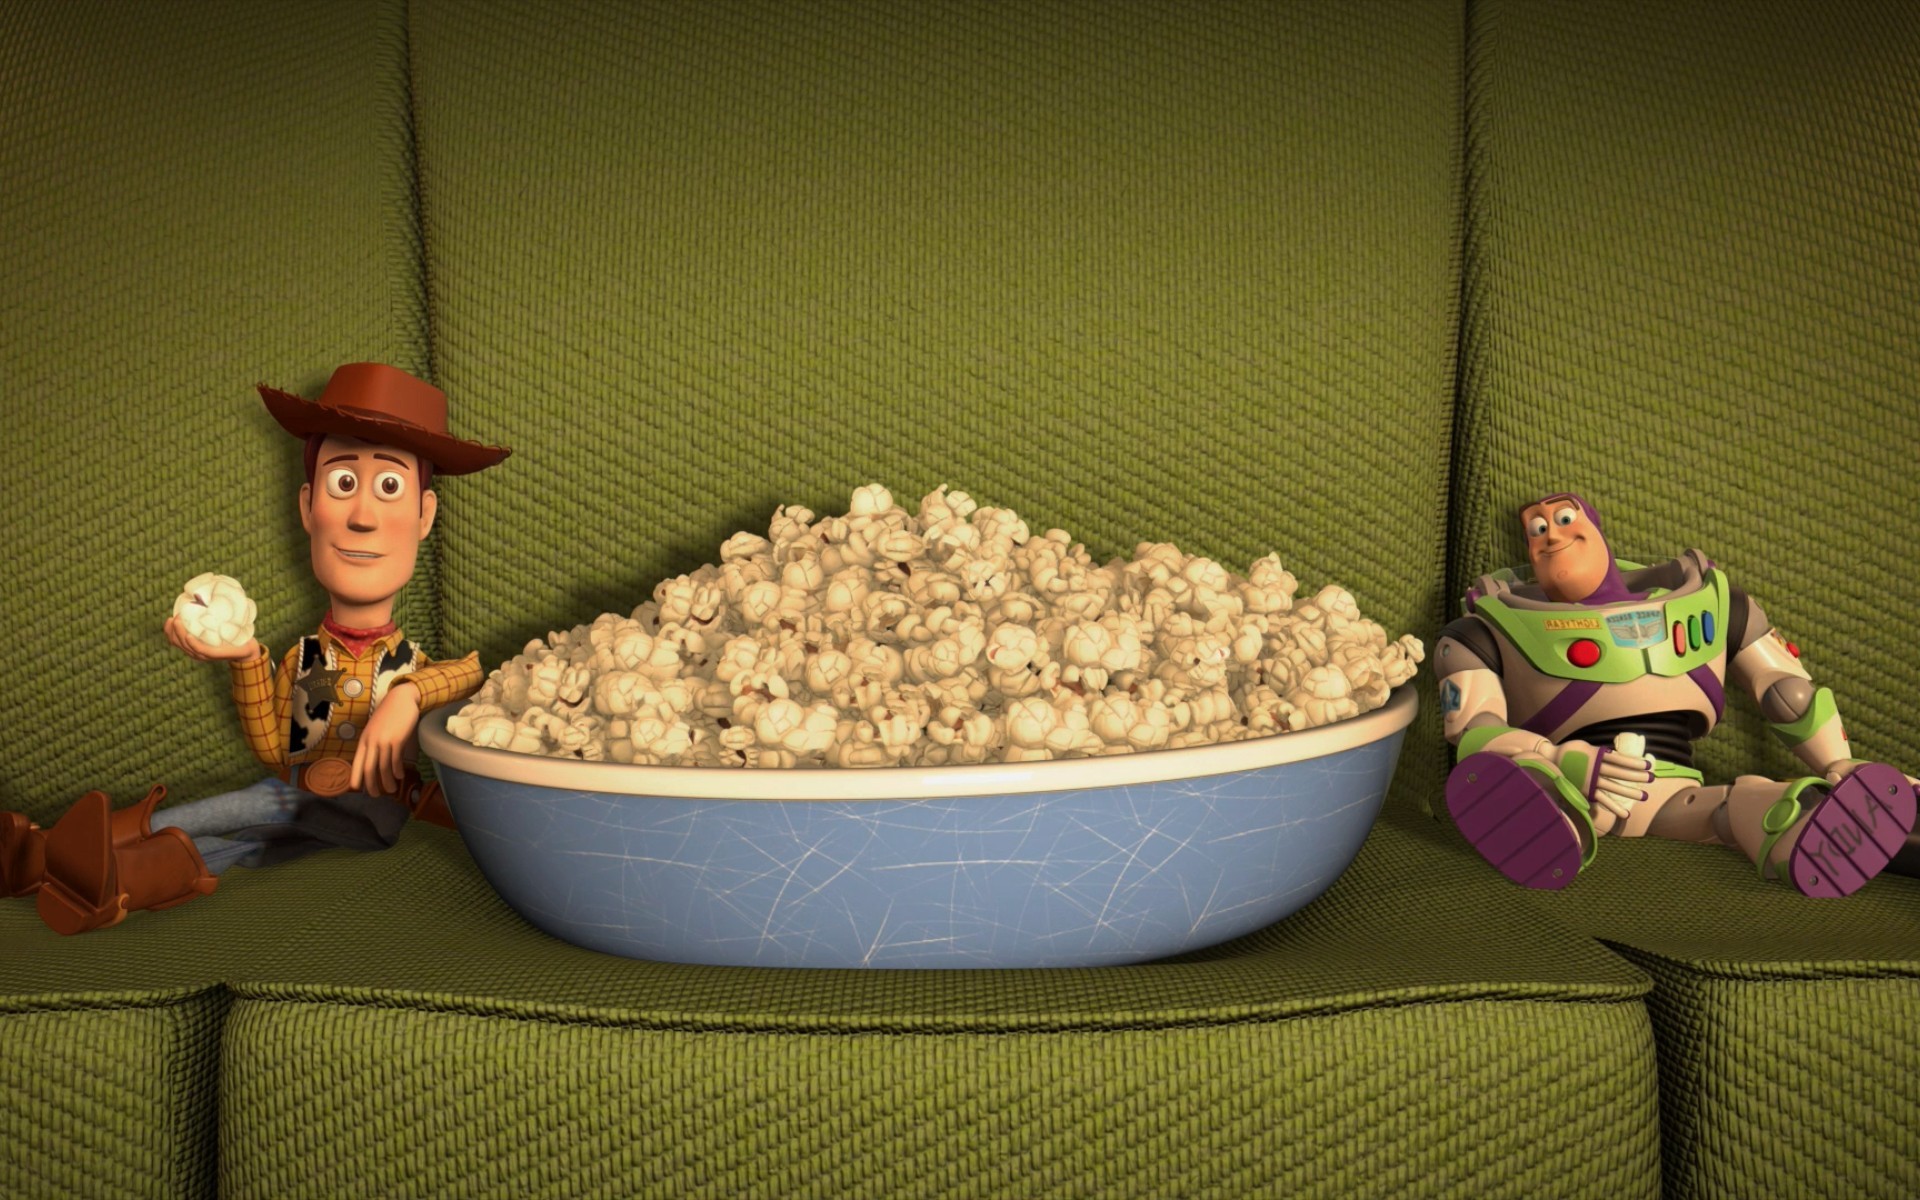 Download Sheriff Woody and Buzz Lightyear   Toy Story wallpaper